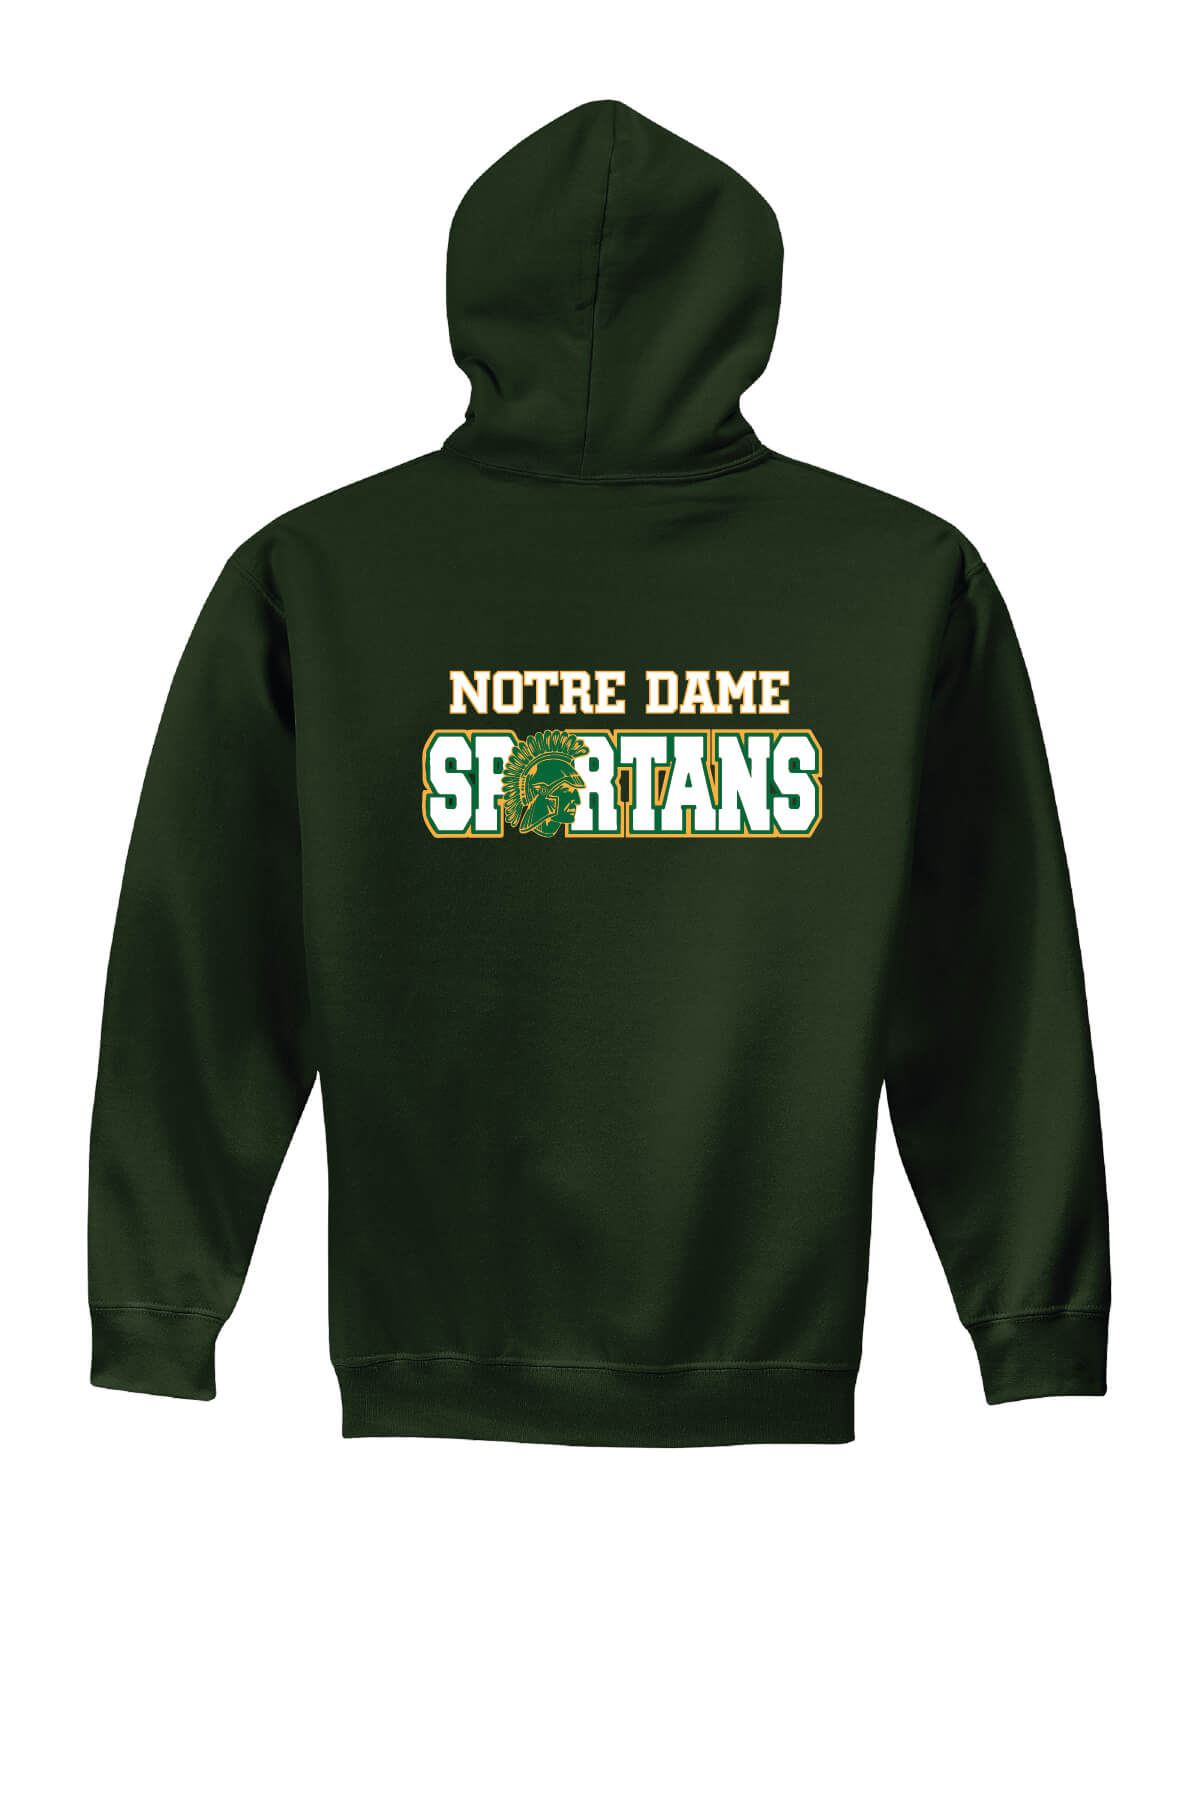 We Are ND Hoodie back-green